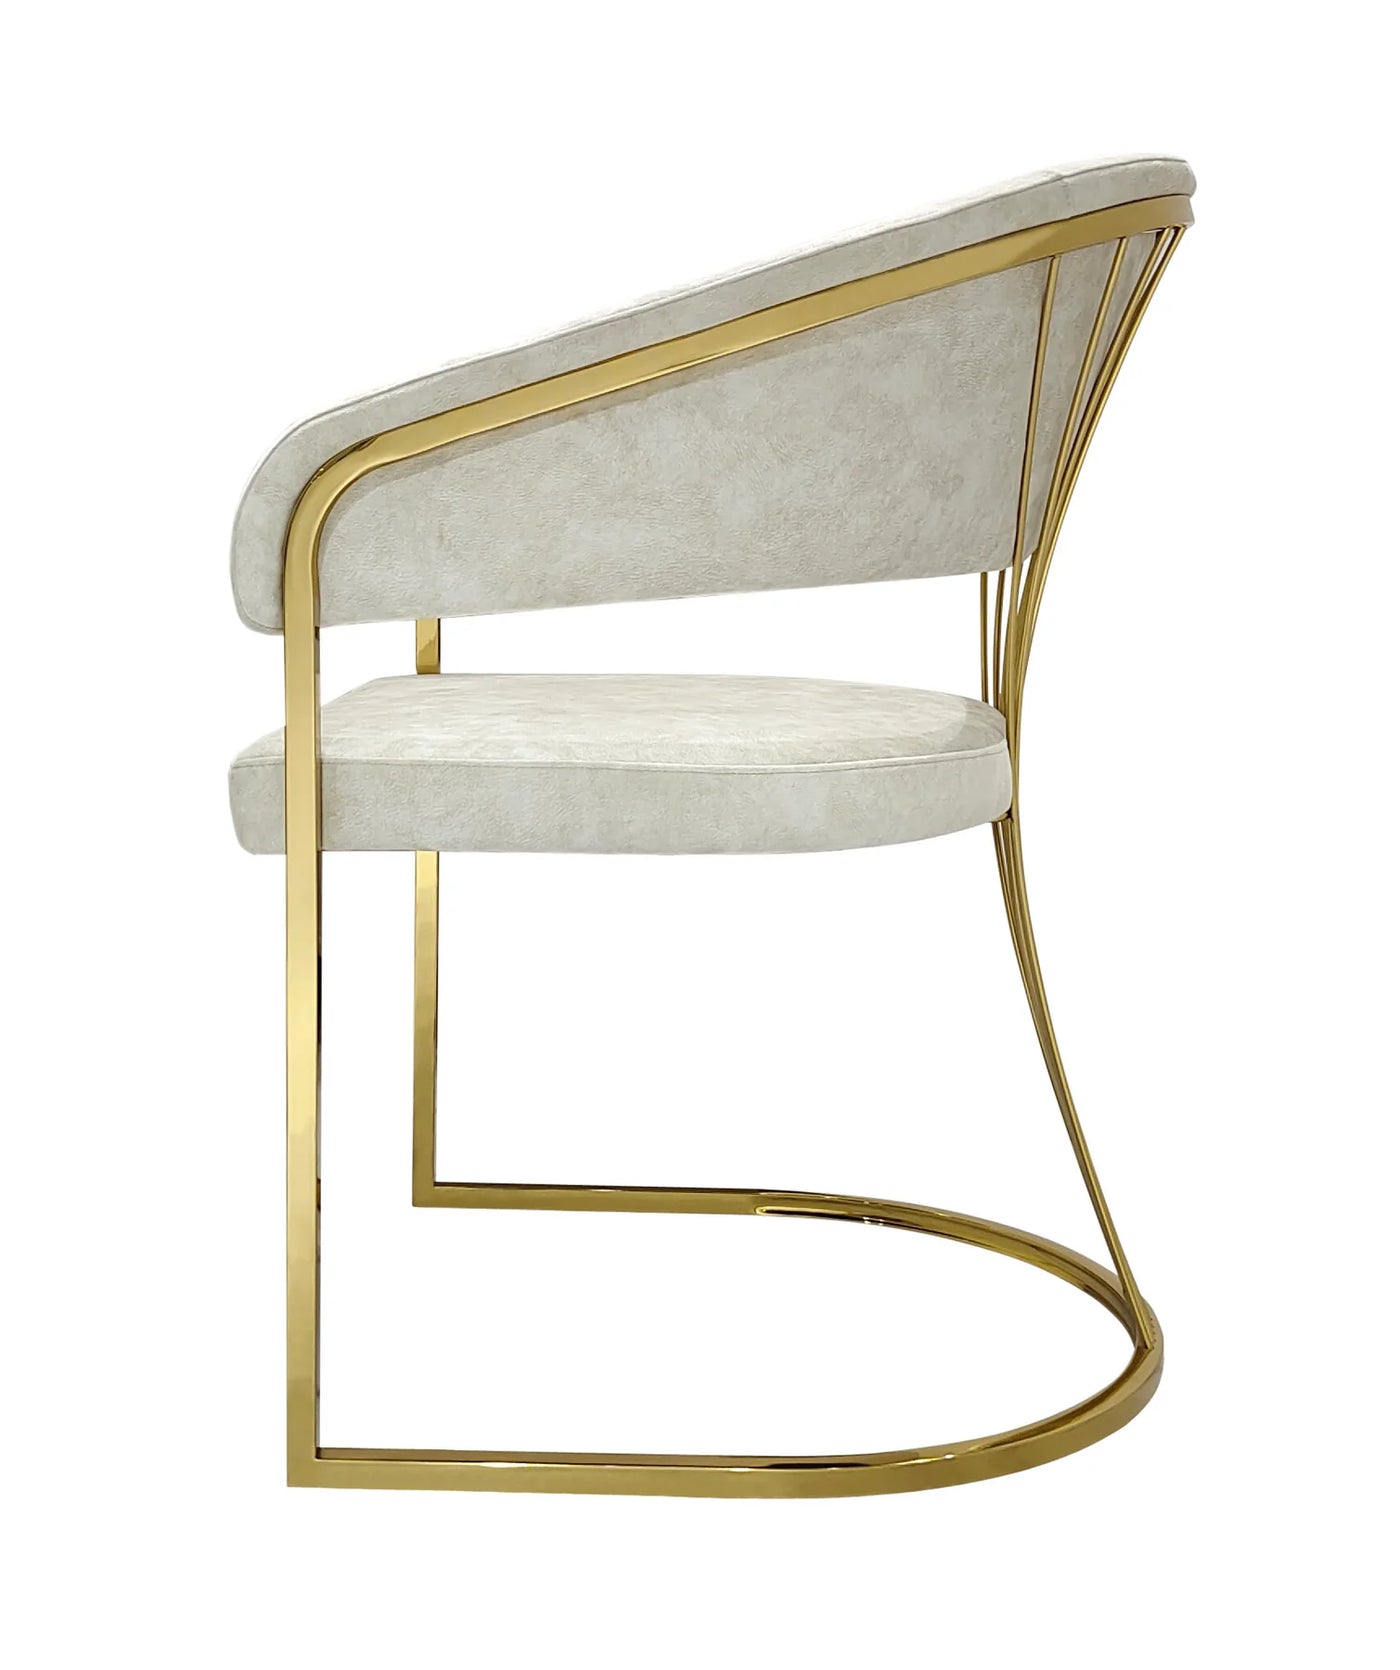 Ohio Gold White Marble 180cm Dining Table + Porto Cream/Gold Leathaire Fabric Dining Chairs